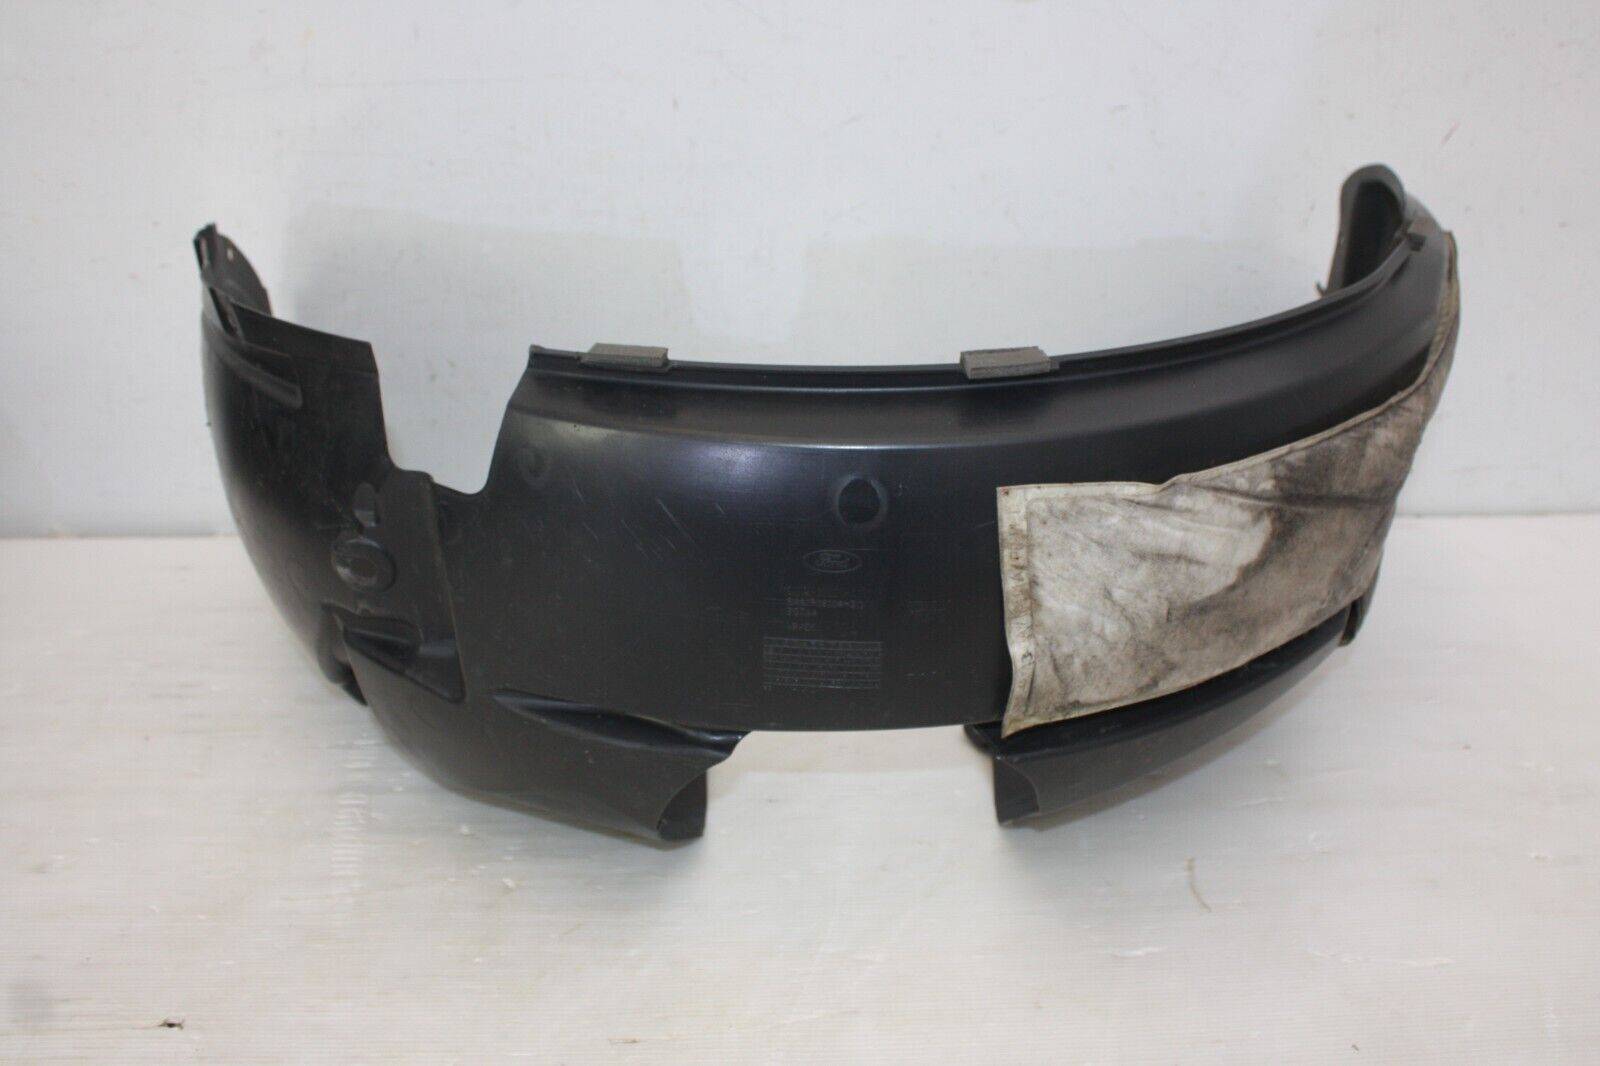 Ford-Fiesta-Front-Right-Side-Wheel-Liner-Splash-Guard-2008-to-2012-8A61-16114-B-175656992480-7